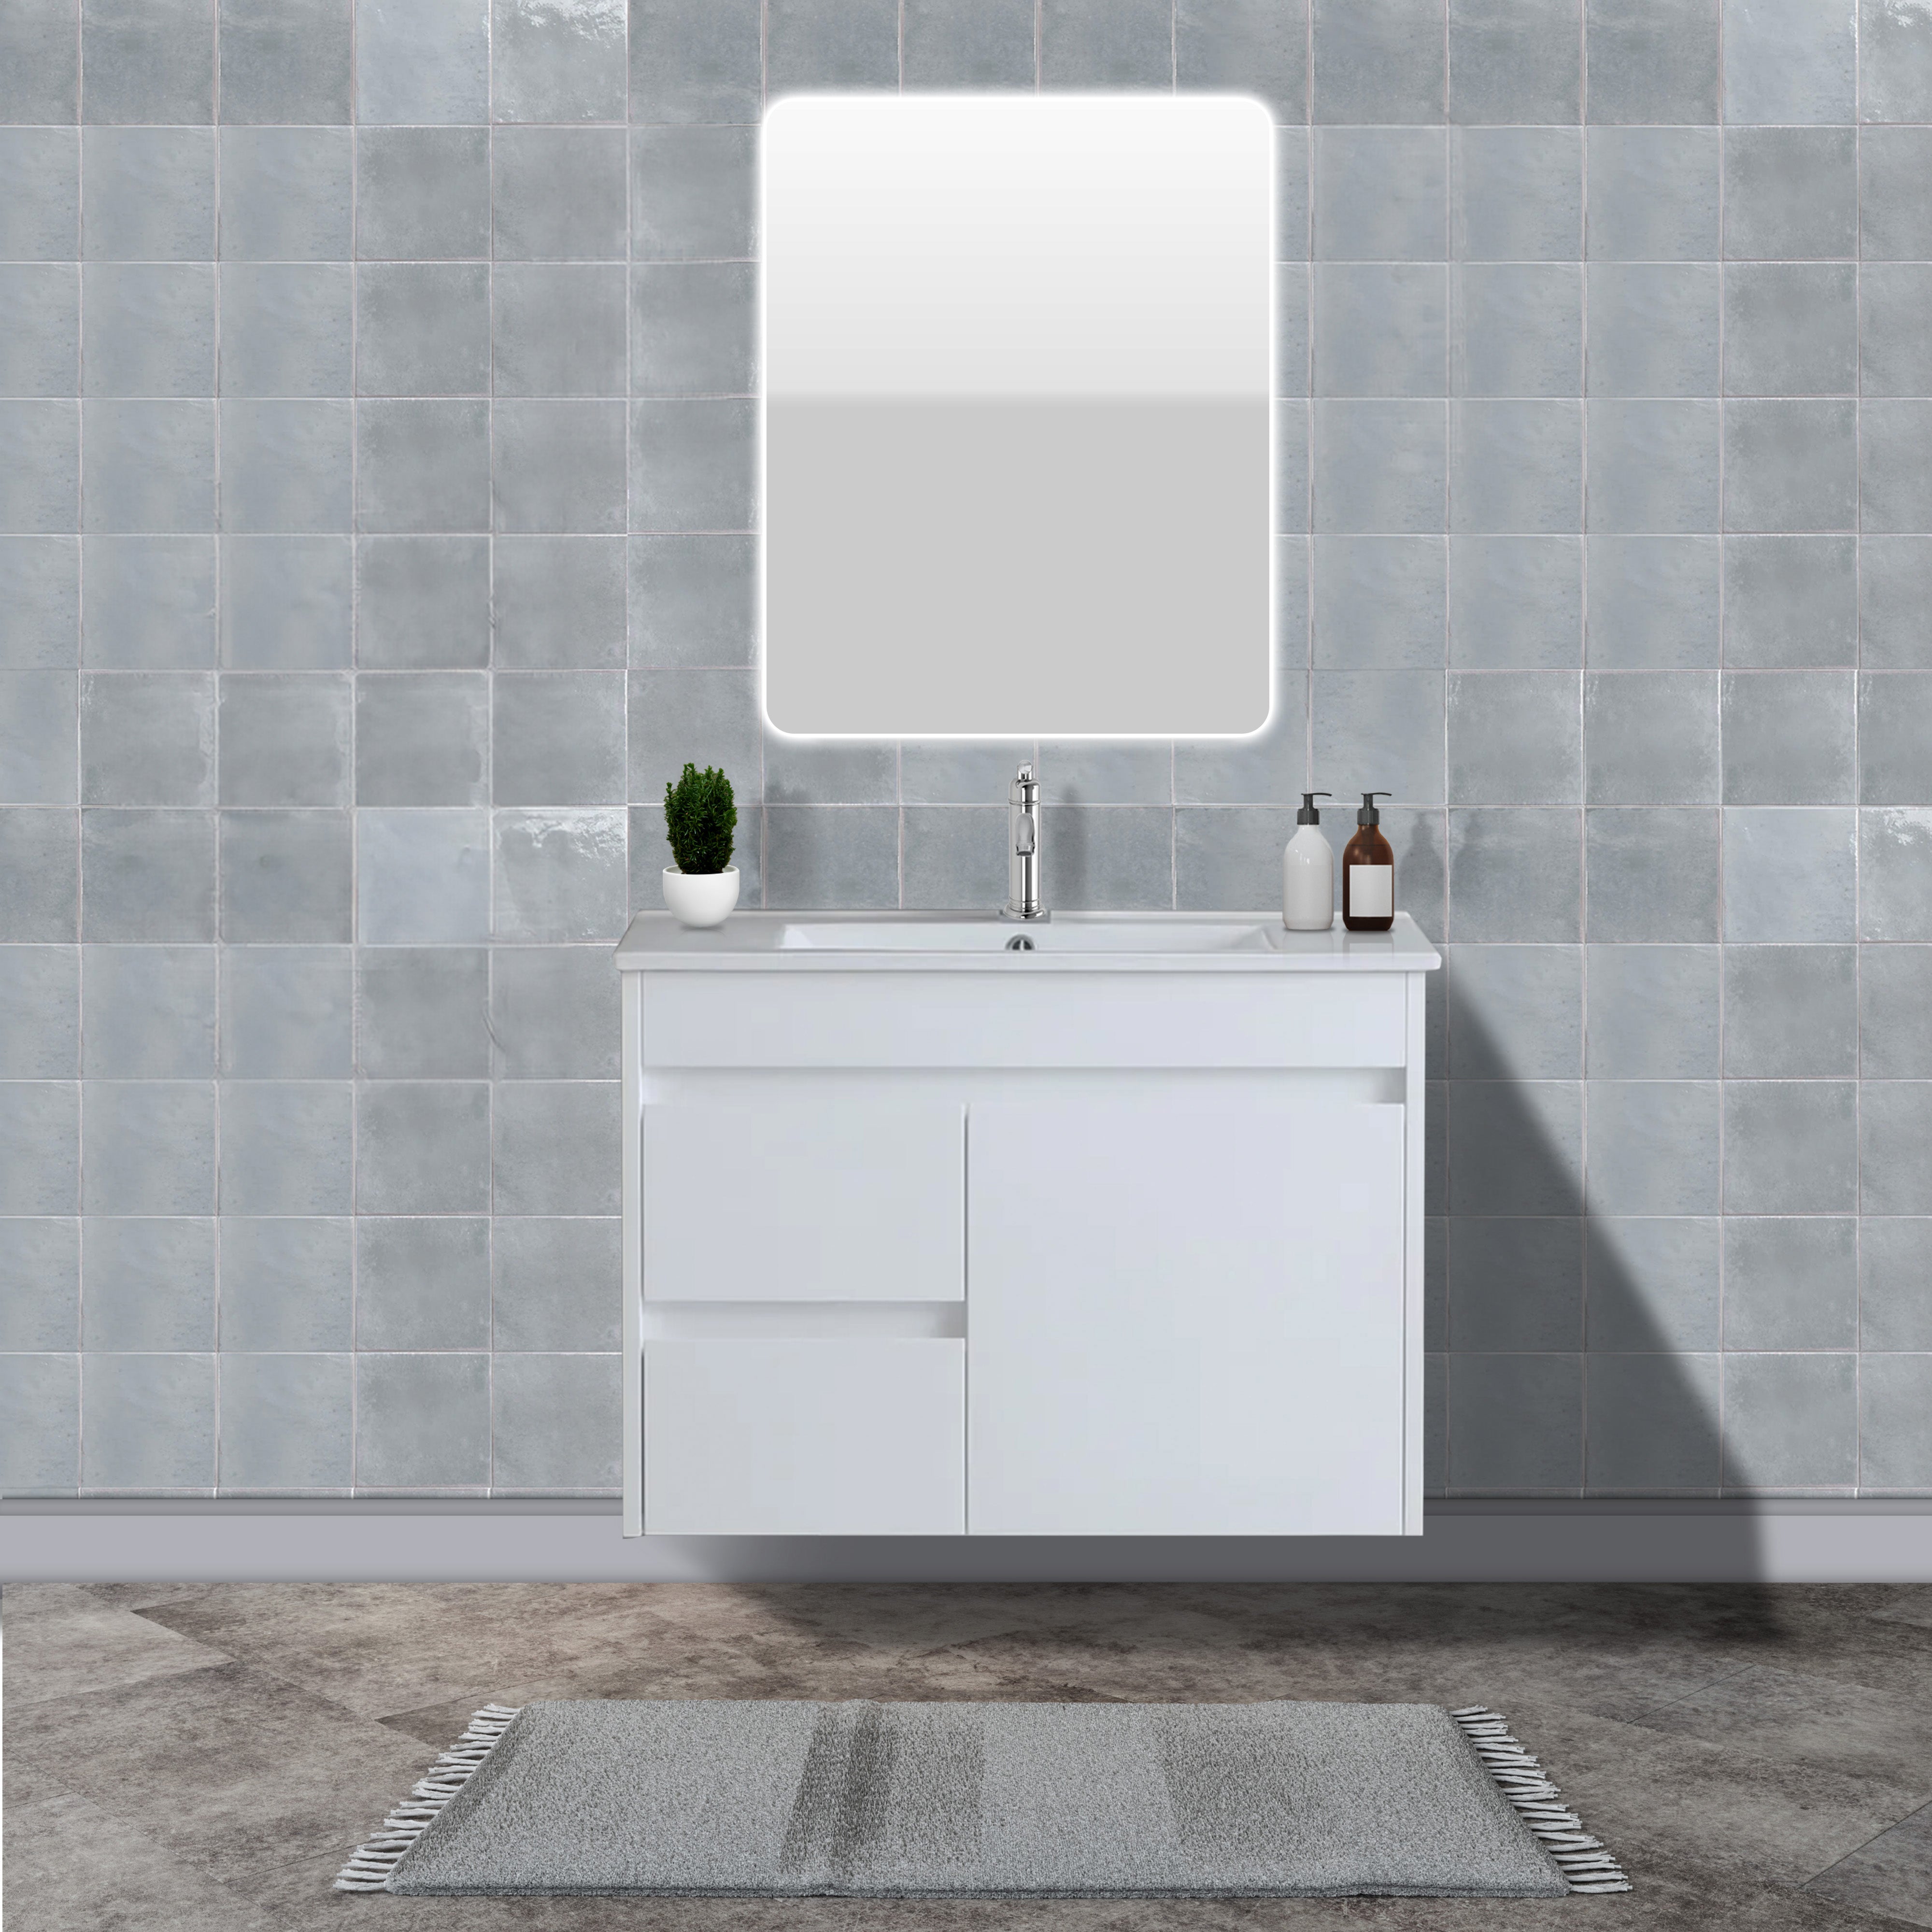 POSEIDON WHITE 750MM SPACE SAVING SINGLE BOWL WALL HUNG VANITY AVAILABLE IN LEFT HAND AND RIGHT HAND DRAWER